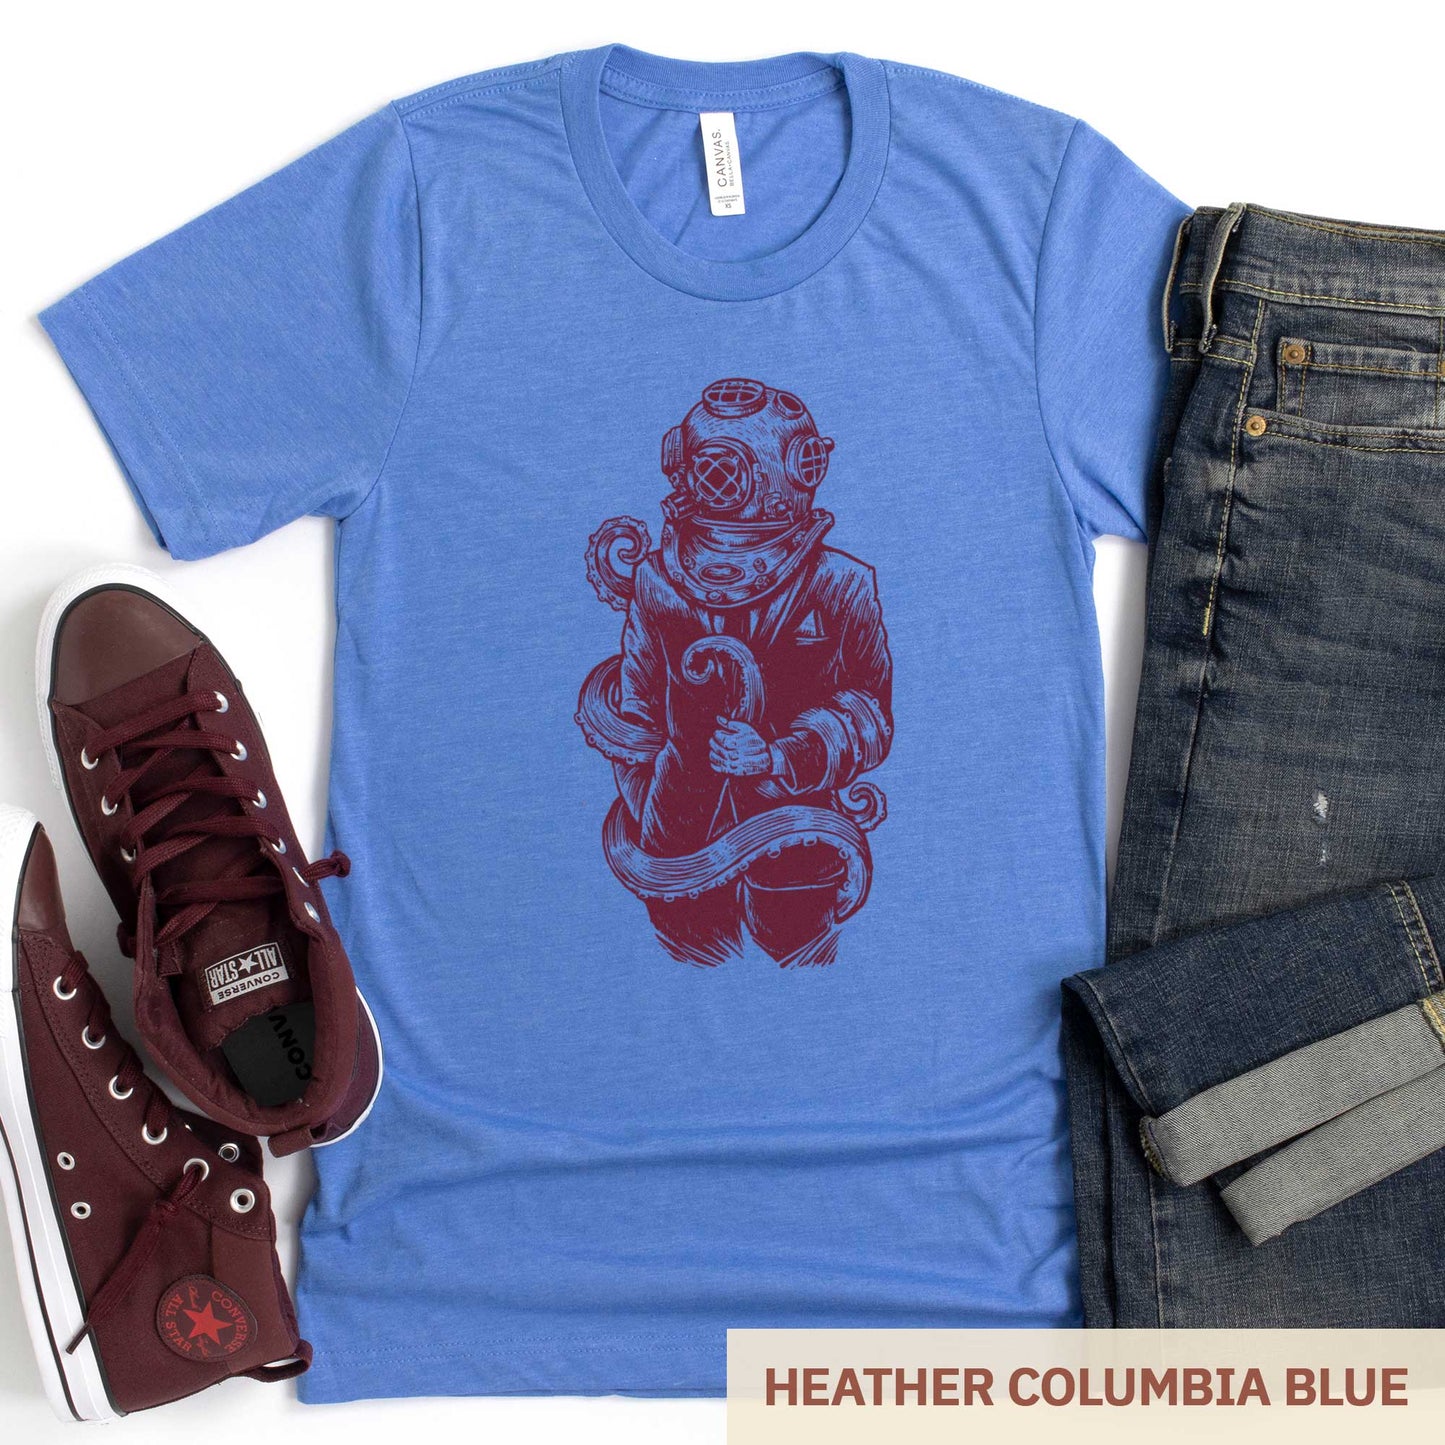 A heather columbia blue Bella Canvas t-shirt featuring a figure in a business suit wearing a vintage diver's helmet with octopus tentacles wrapped around them.